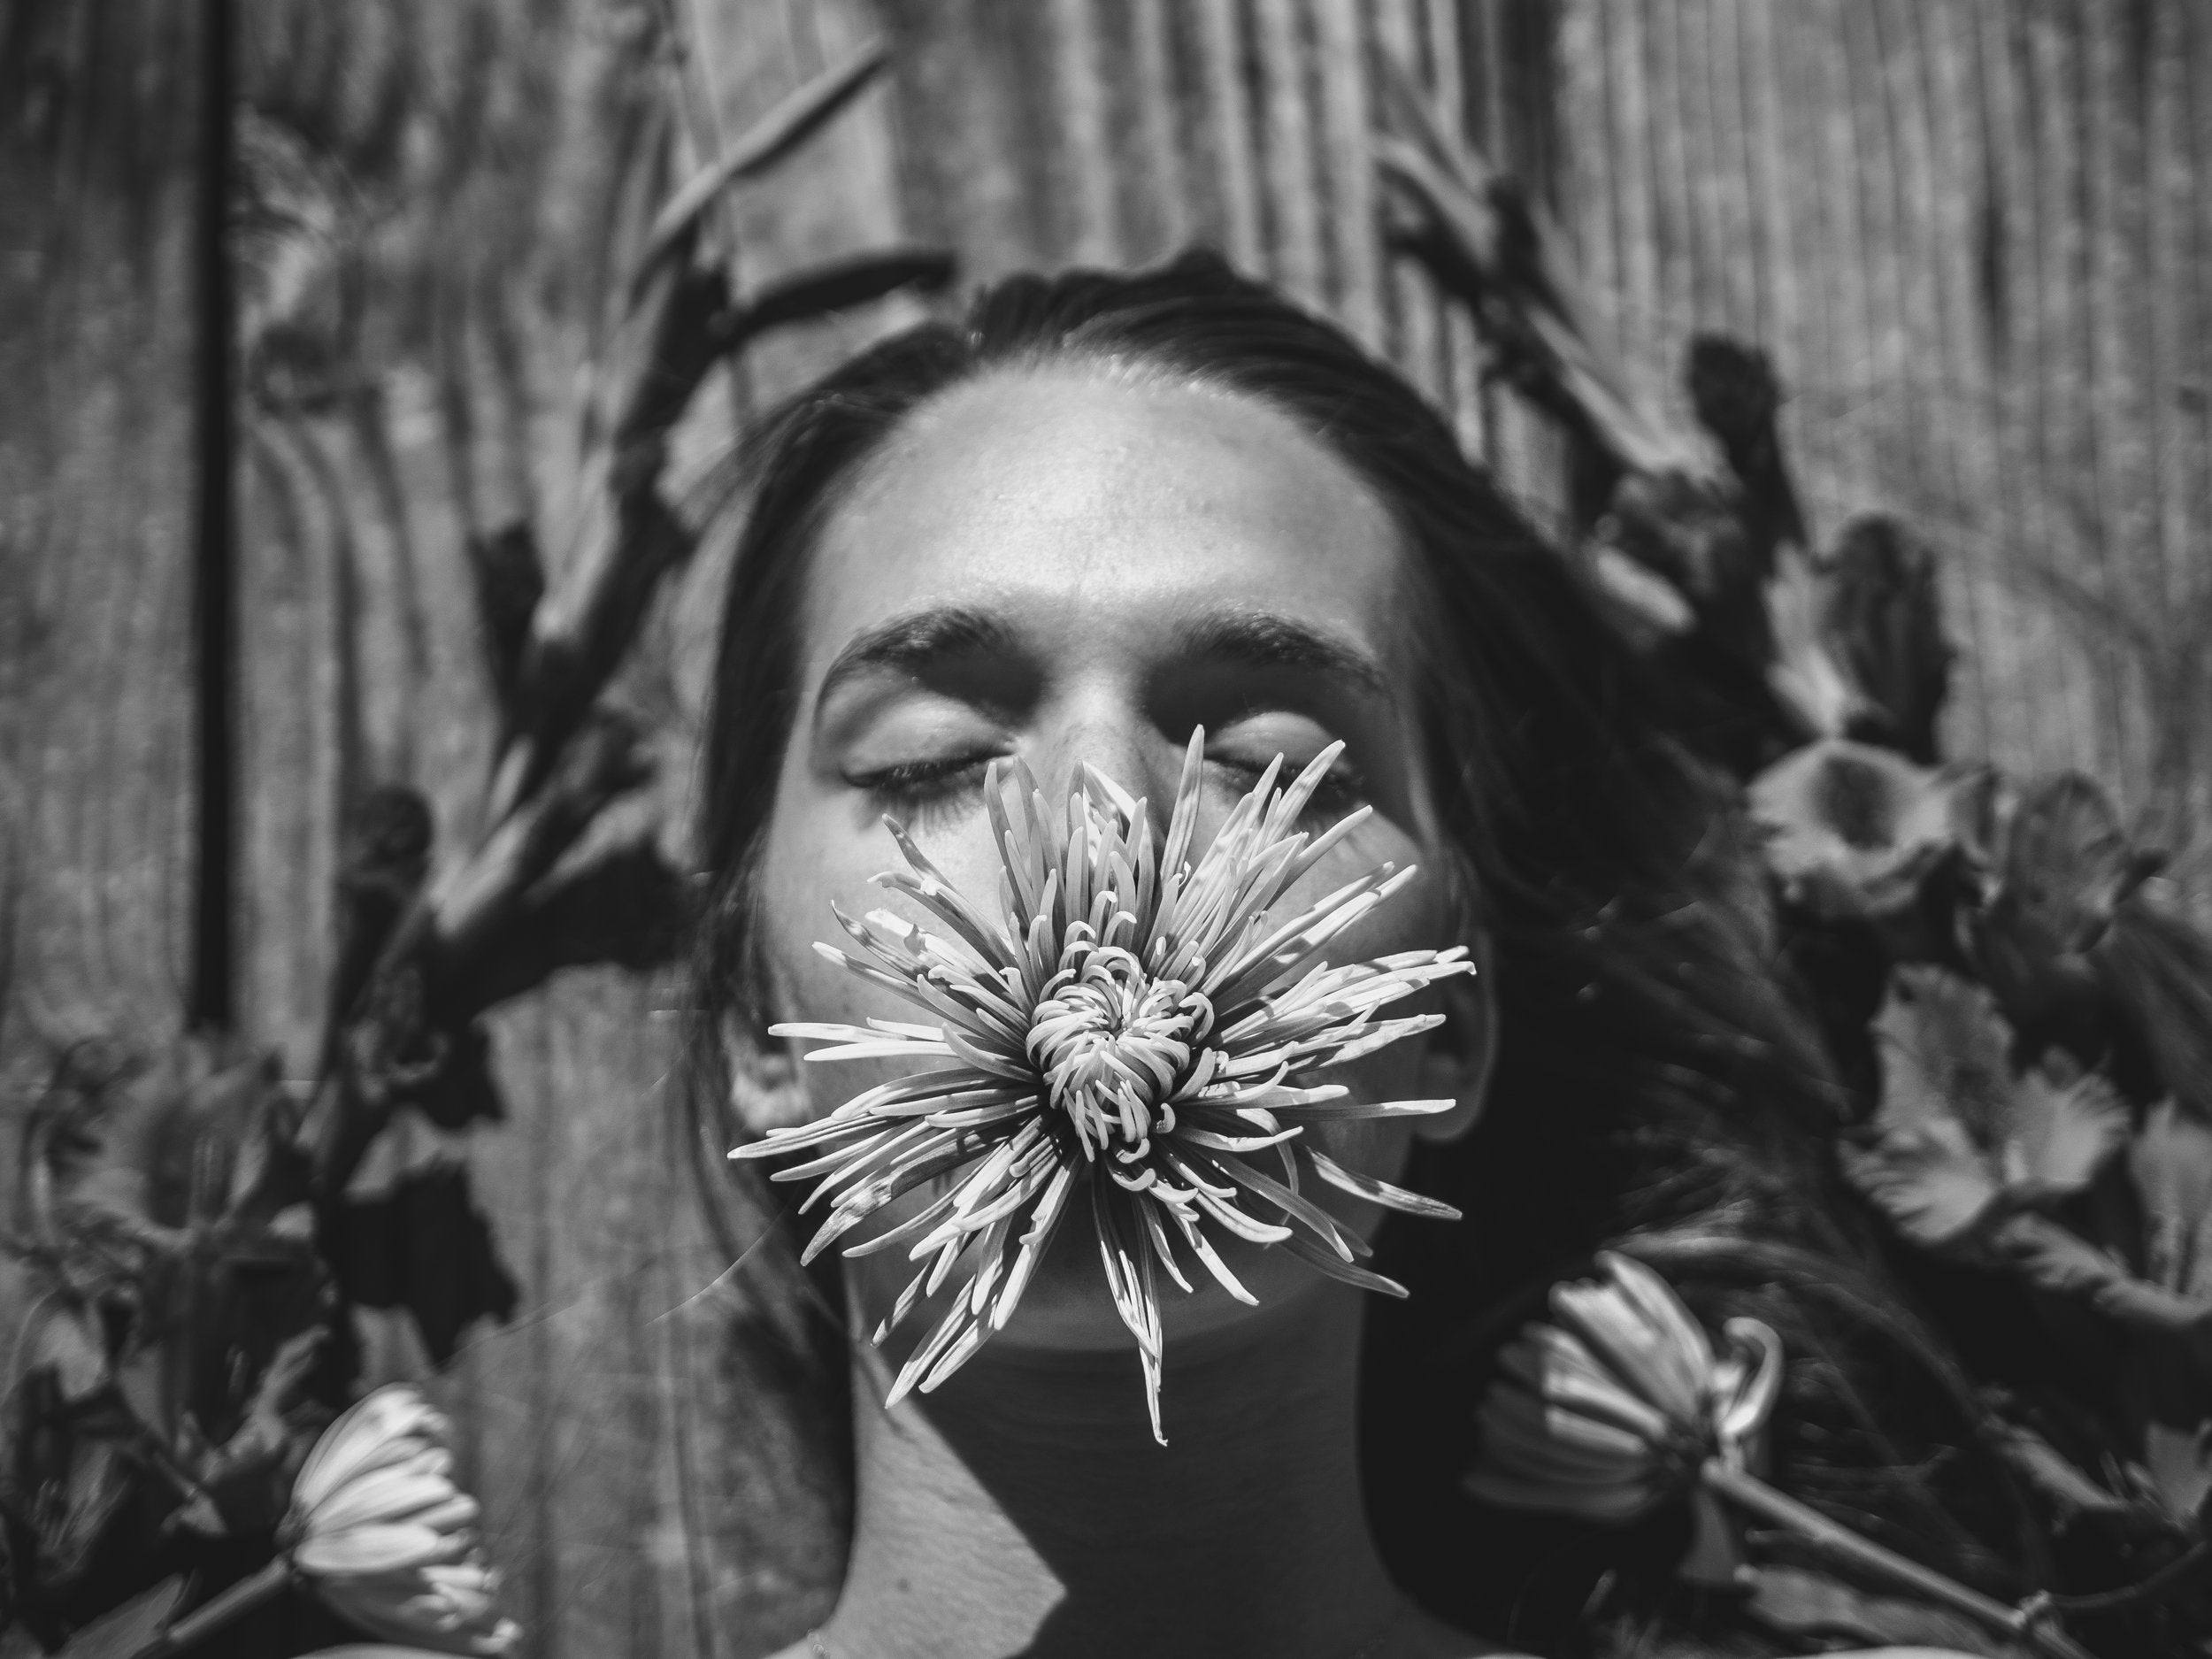 Black-and-white photo of woman lying down, with a large flower on her face over her mouth and nose.